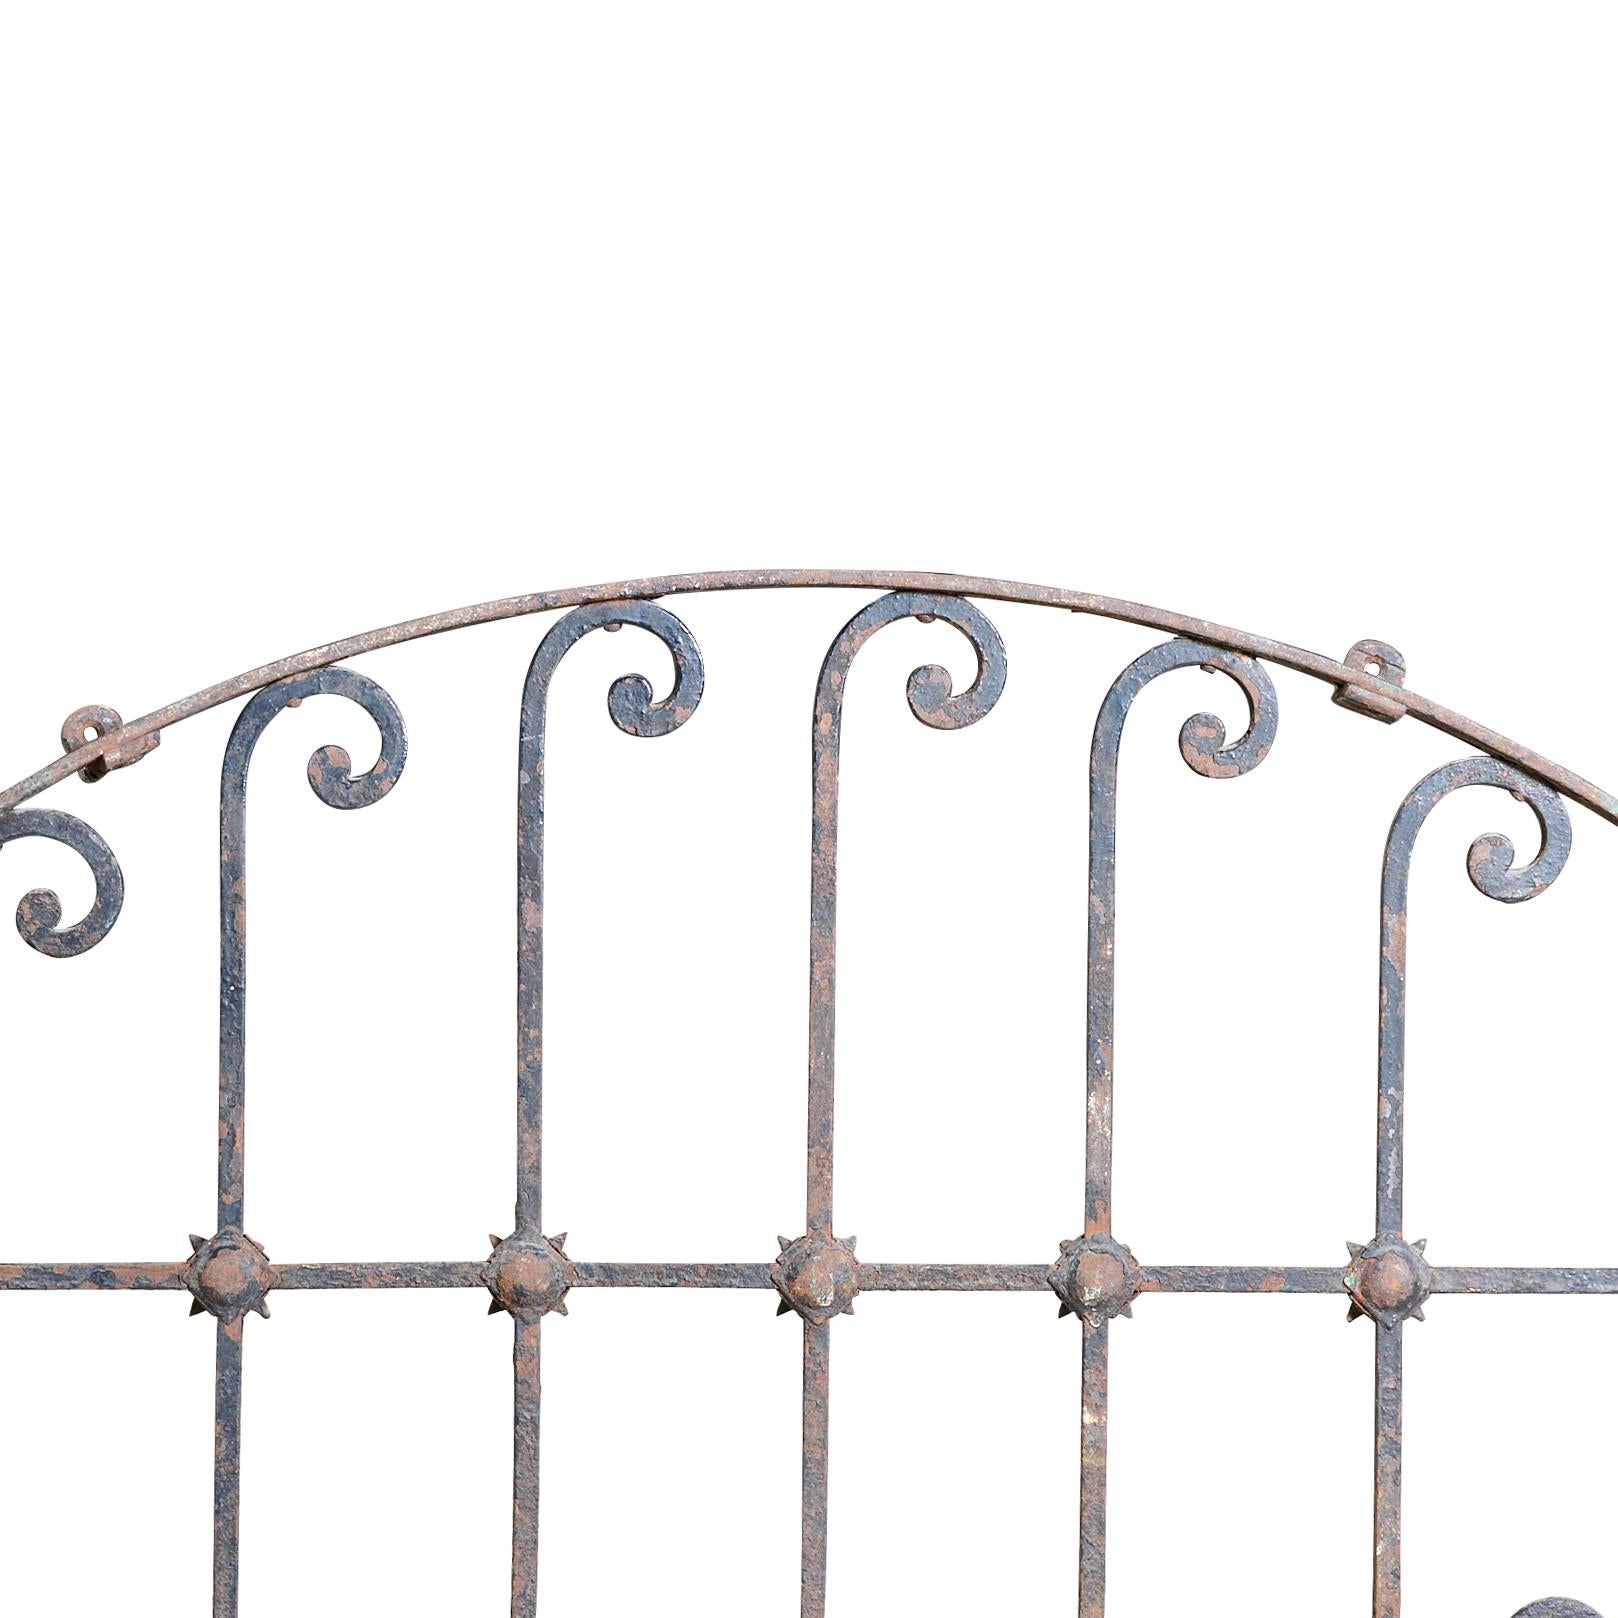 Wrought Iron Decorative Arched Grill In Good Condition For Sale In Chicago, IL